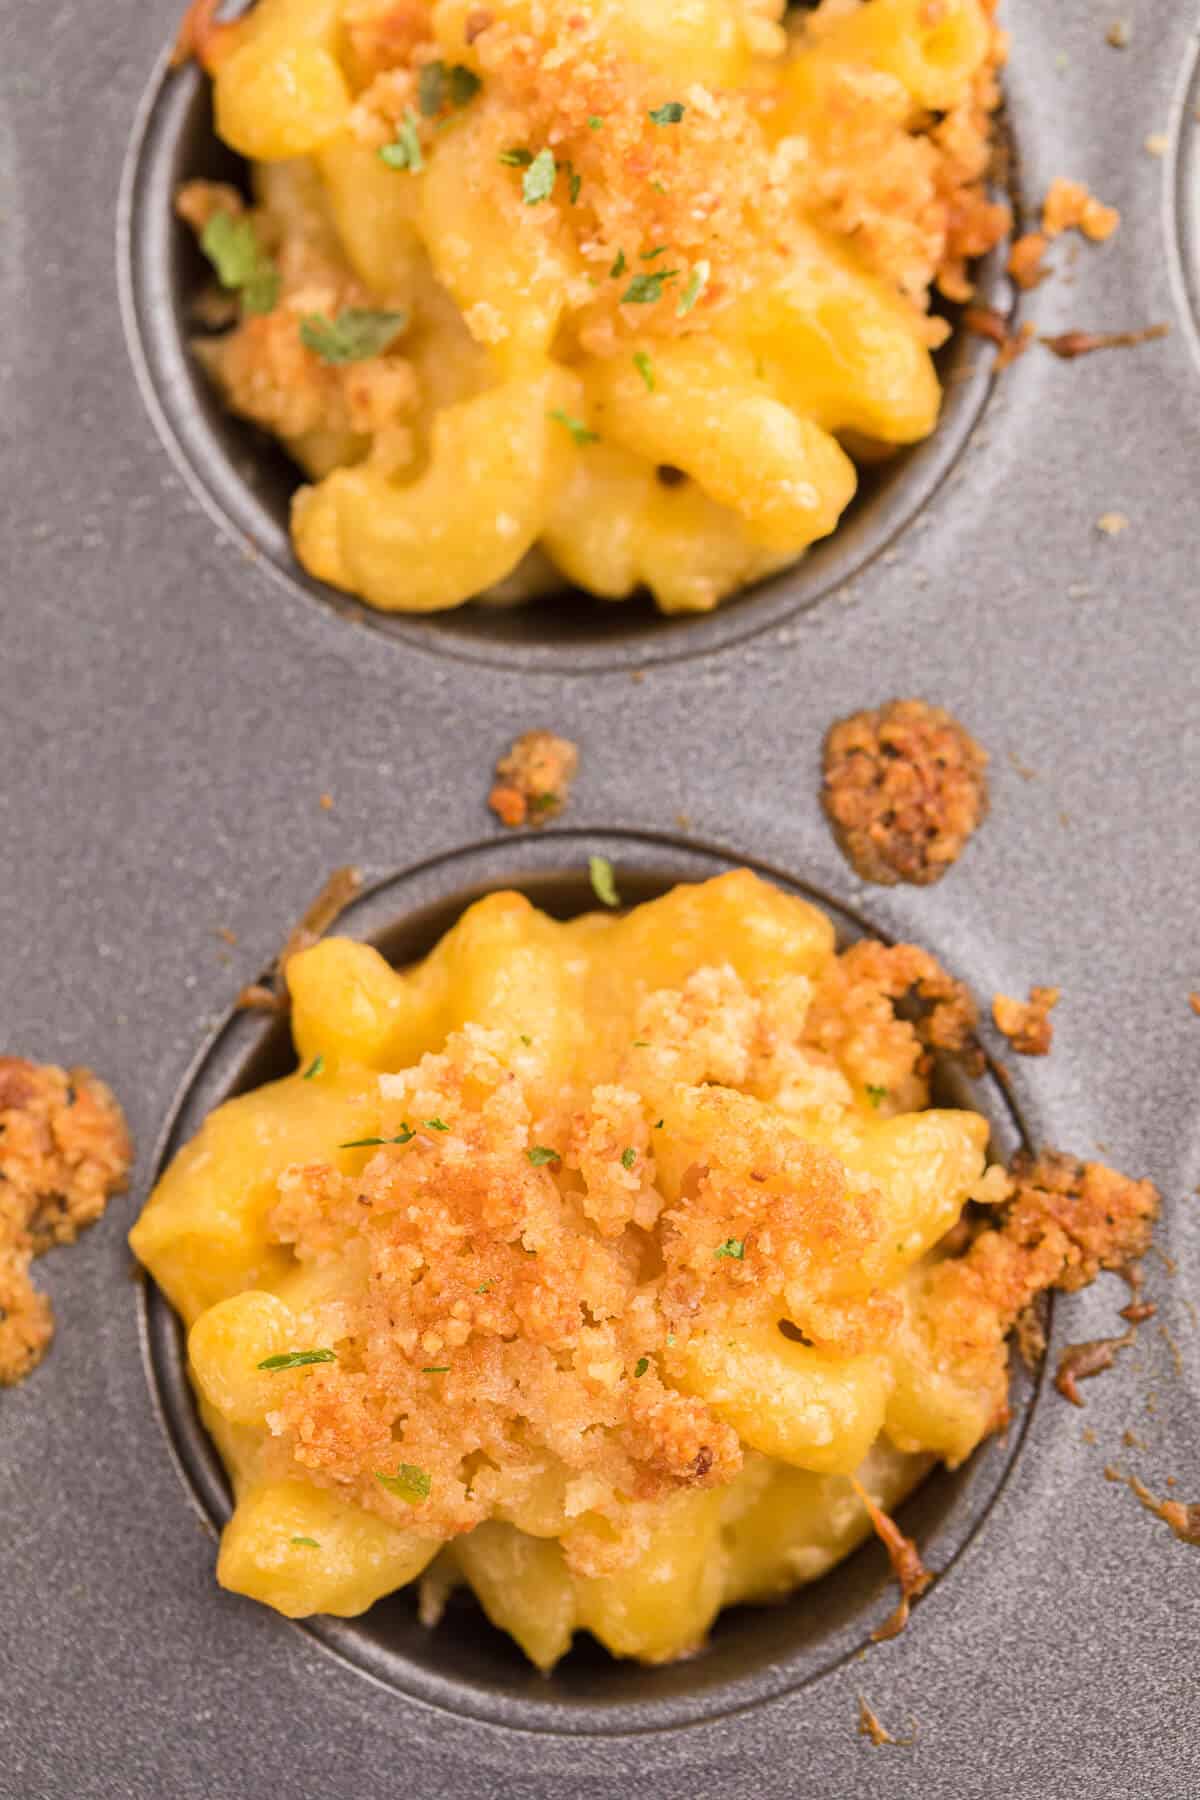 Mac and Cheese Cups - Comfort food in a cup! The perfect cozy, cheesy side dish, but handheld for appetizers and tailgating.